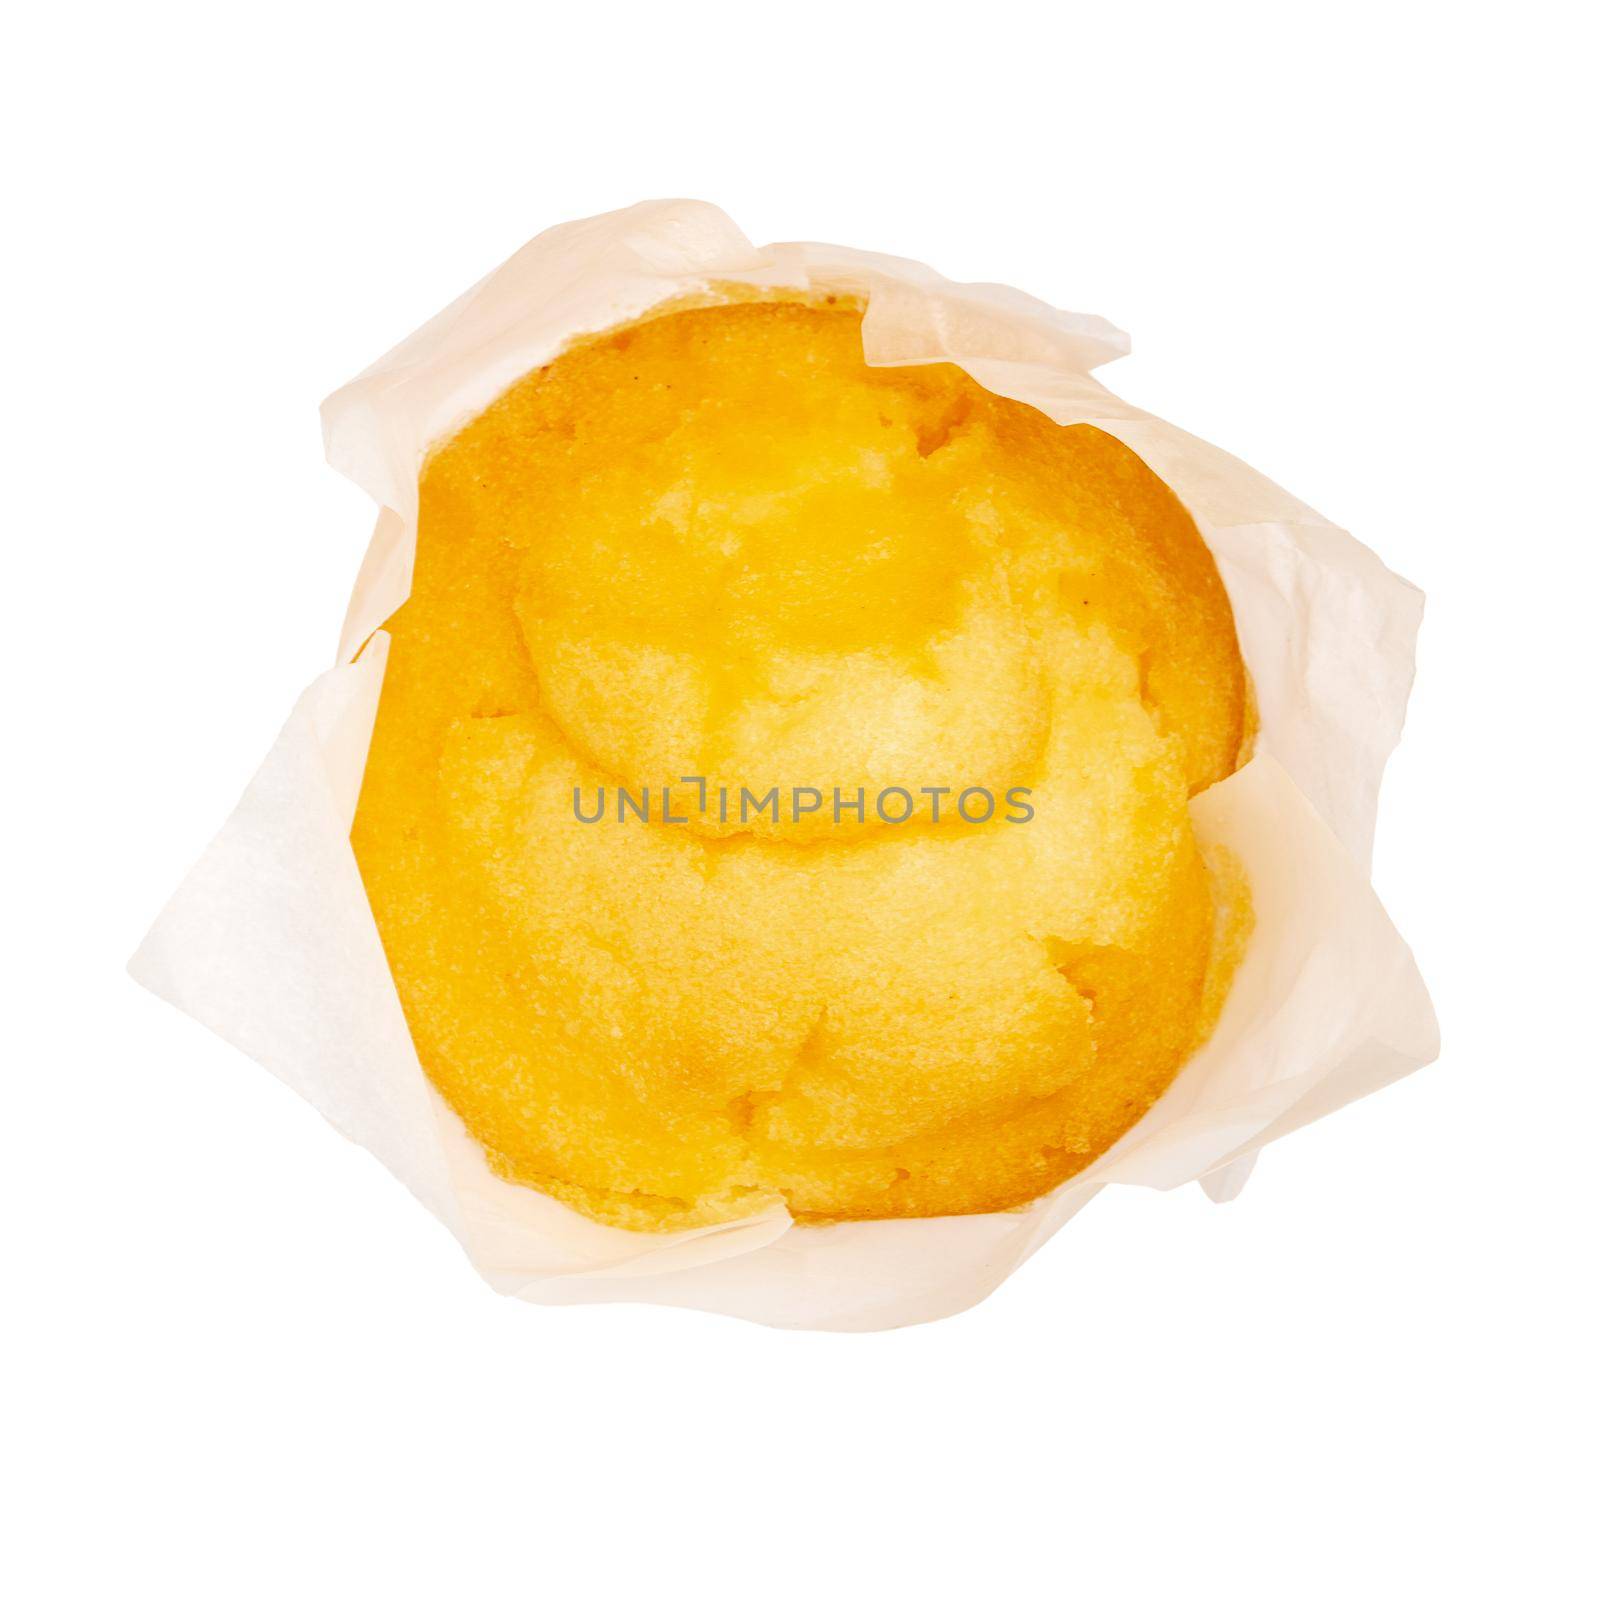 Closeup of a Magdalena Typical Spanish Plain Muffin. Sweet Food or Dessert. Three Fresh Baked Muffin Isolated on White Background in American Style. Irresistible Tasty Cake.